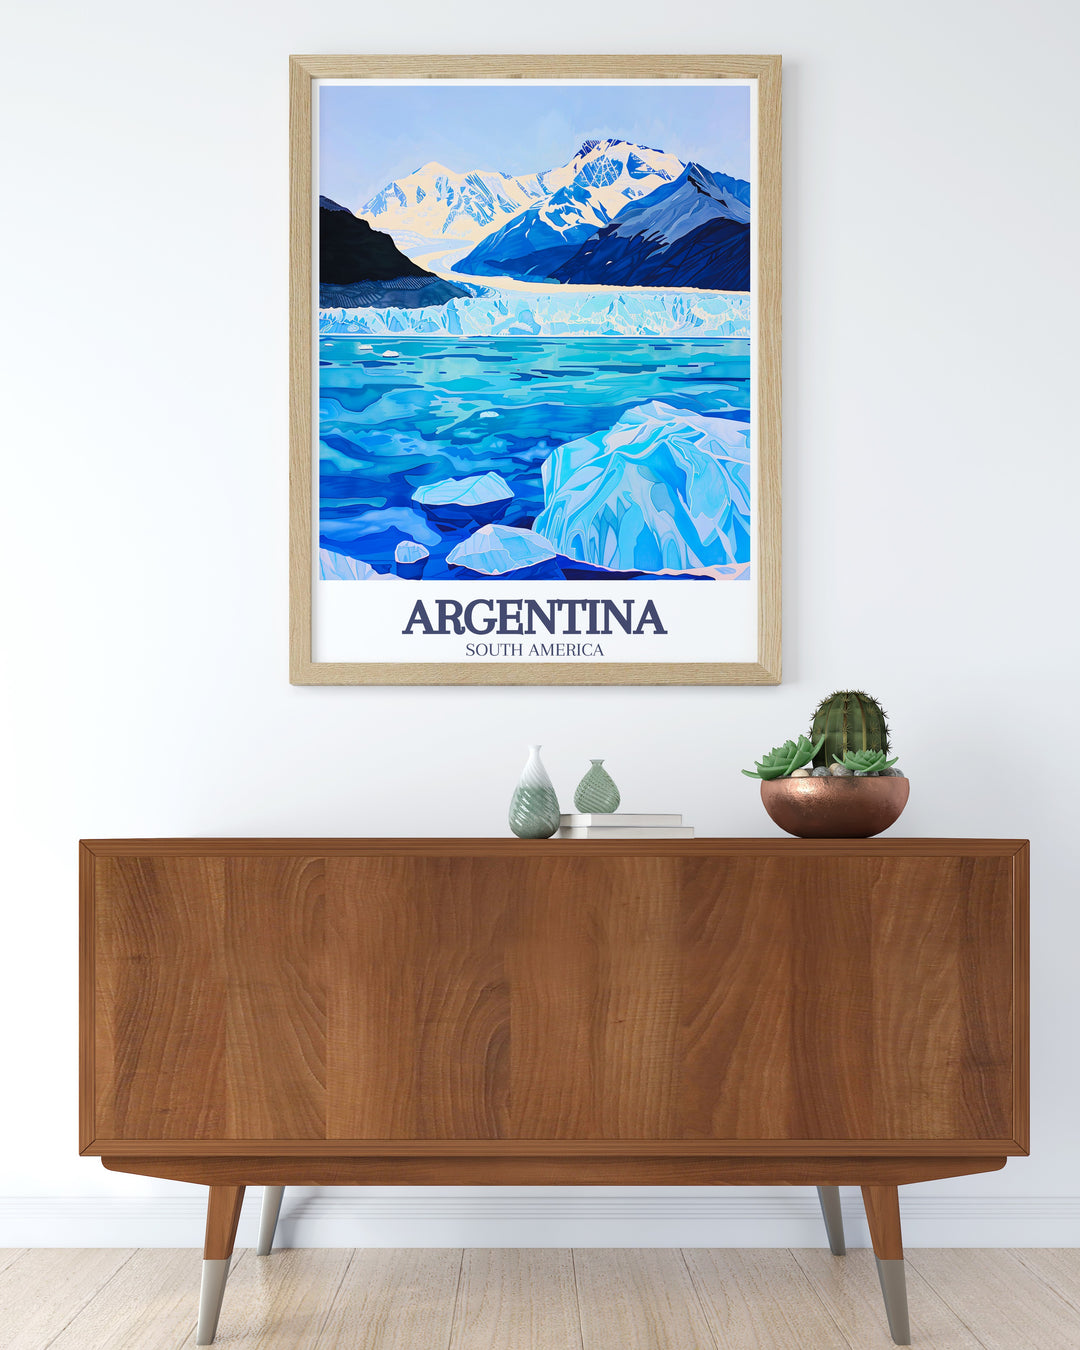 Vintage style Perito Moreno Glacier, Los Glaciares National Park print ideal for those who appreciate classic and timeless art. This Argentina poster brings the majestic glacier to life, adding a touch of elegance to your decor.